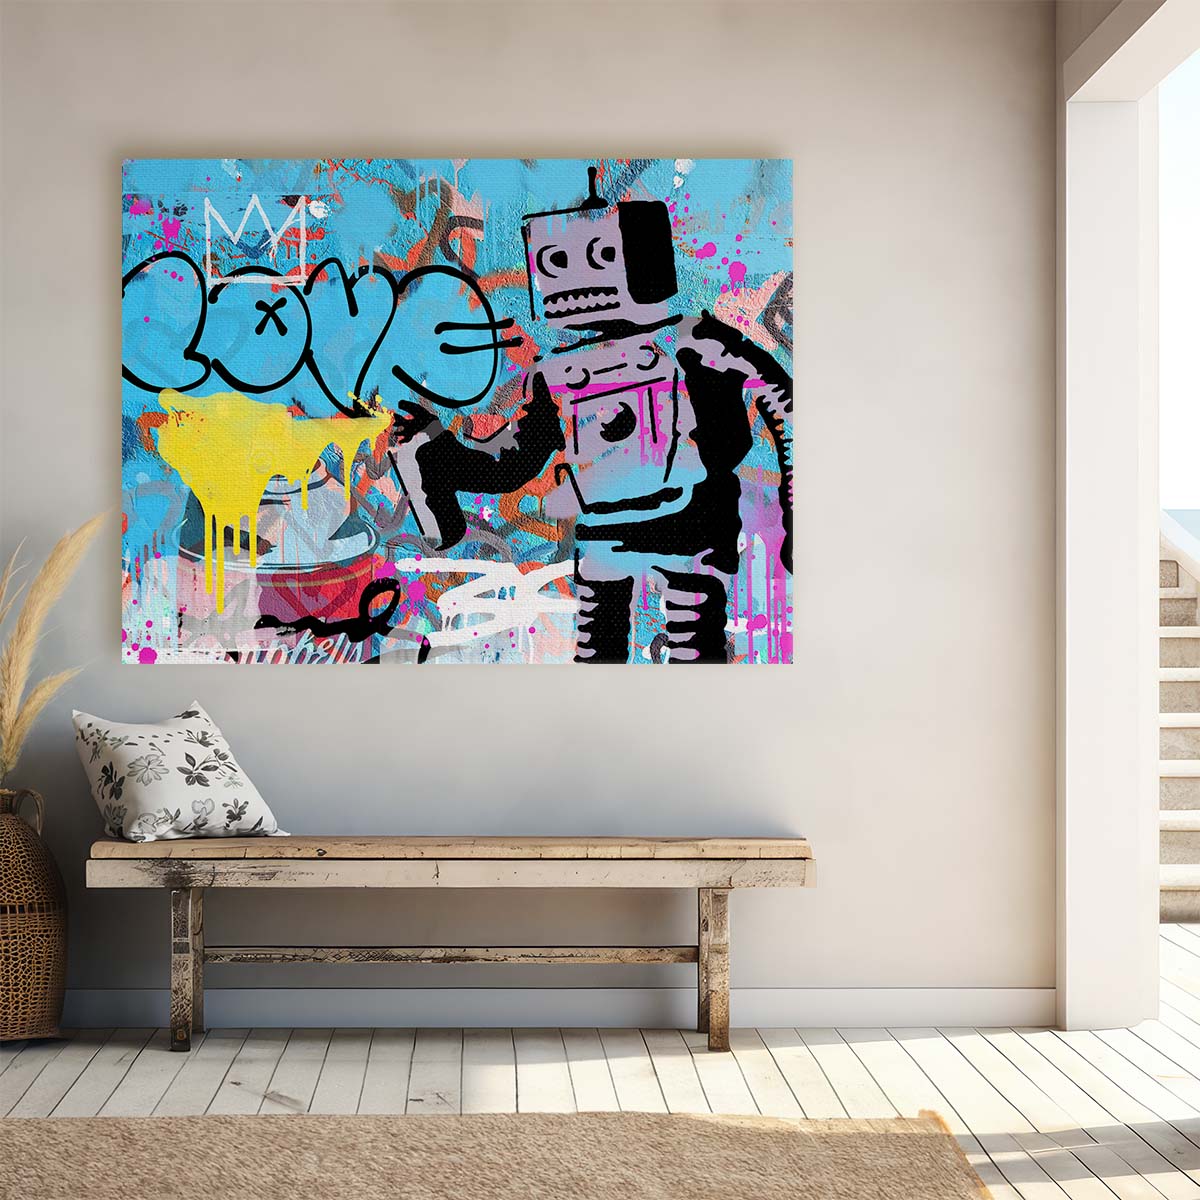 Banksy Love Robot Graffiti Wall Art by Luxuriance Designs. Made in USA.